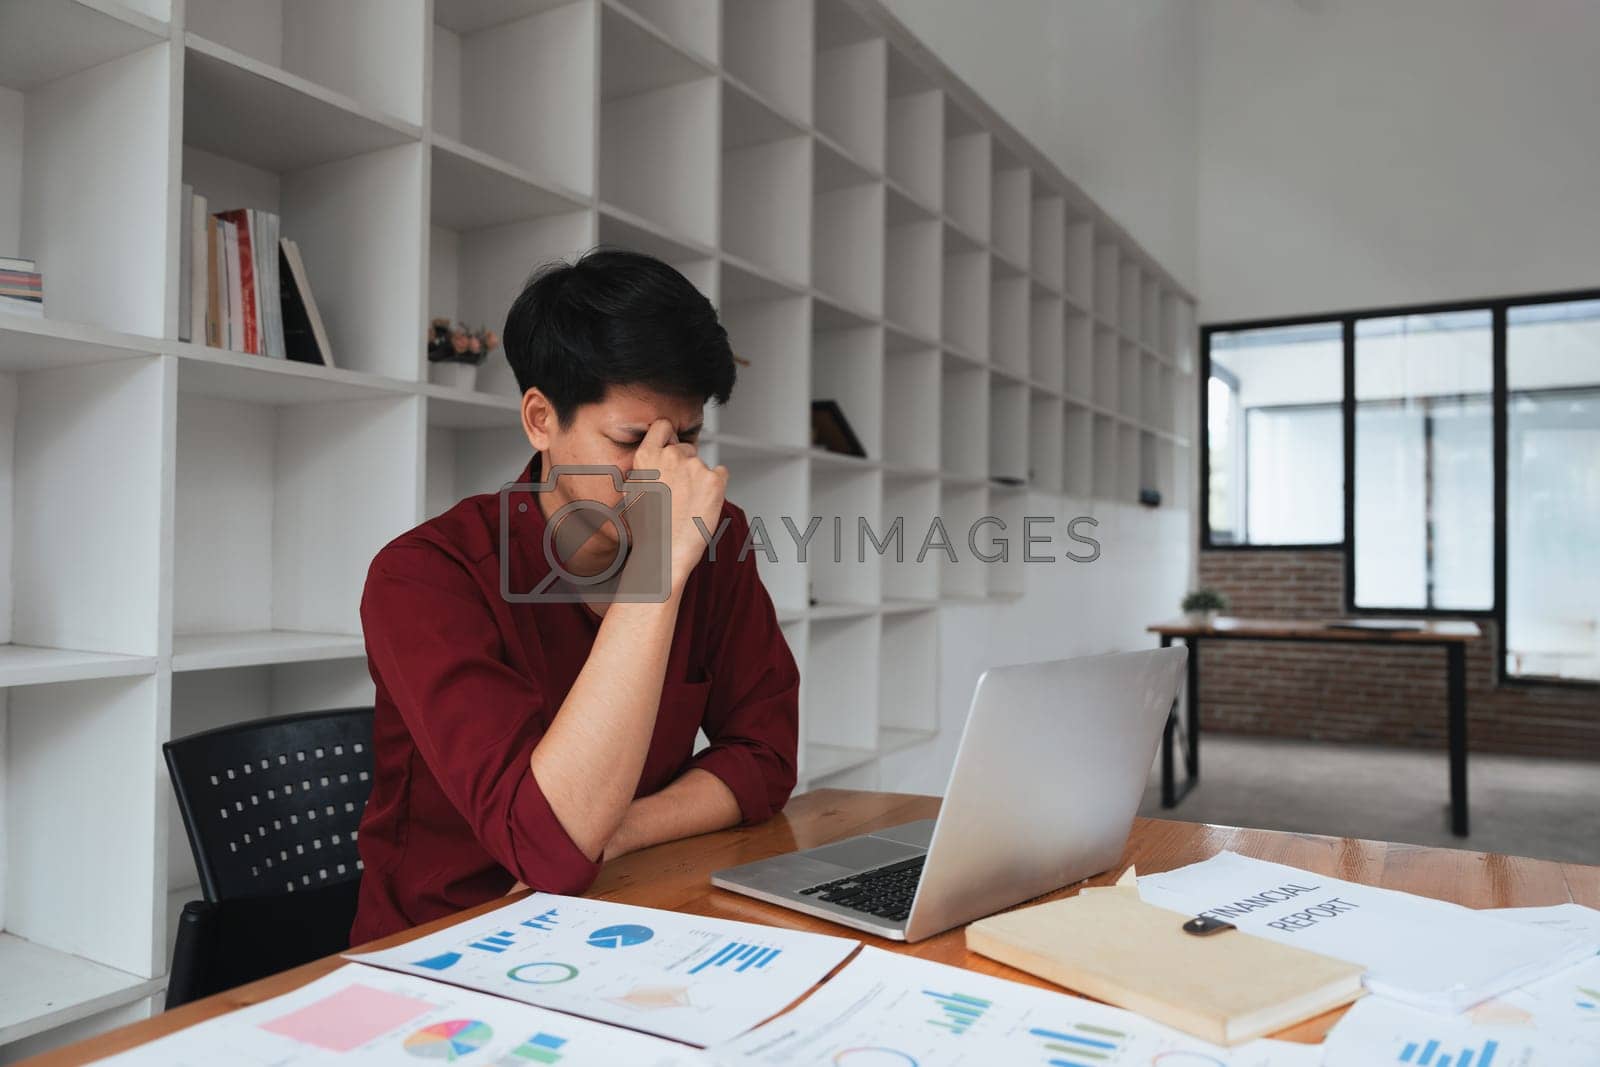 Royalty free image of Stress, anxiety and burnout with work a business man at work using a laptop while suffering from a headache by nateemee